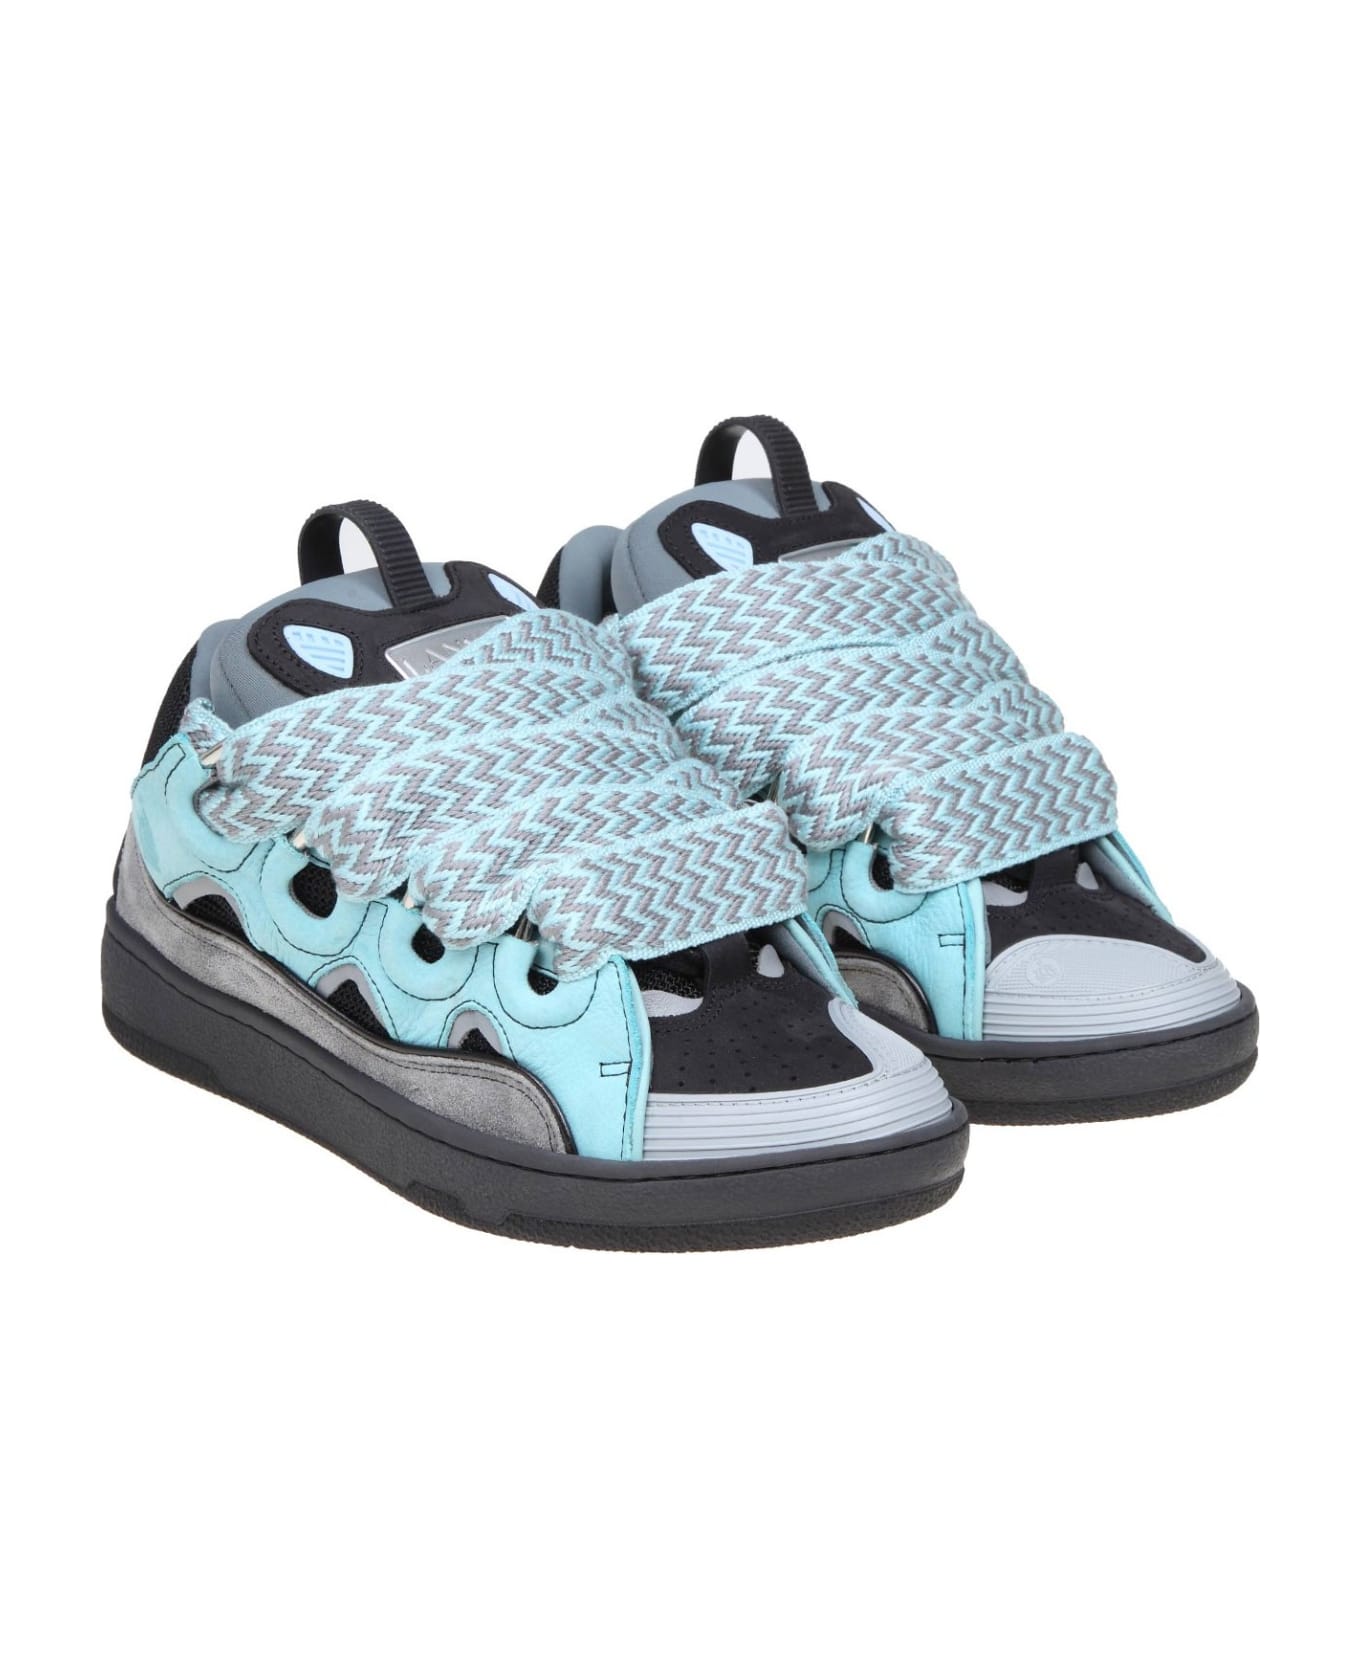 Lanvin Curb Sneakers In Suede And Fabric Color Light Blue/anthracite - LIGHT/BLUE/ANTHRACITE スニーカー